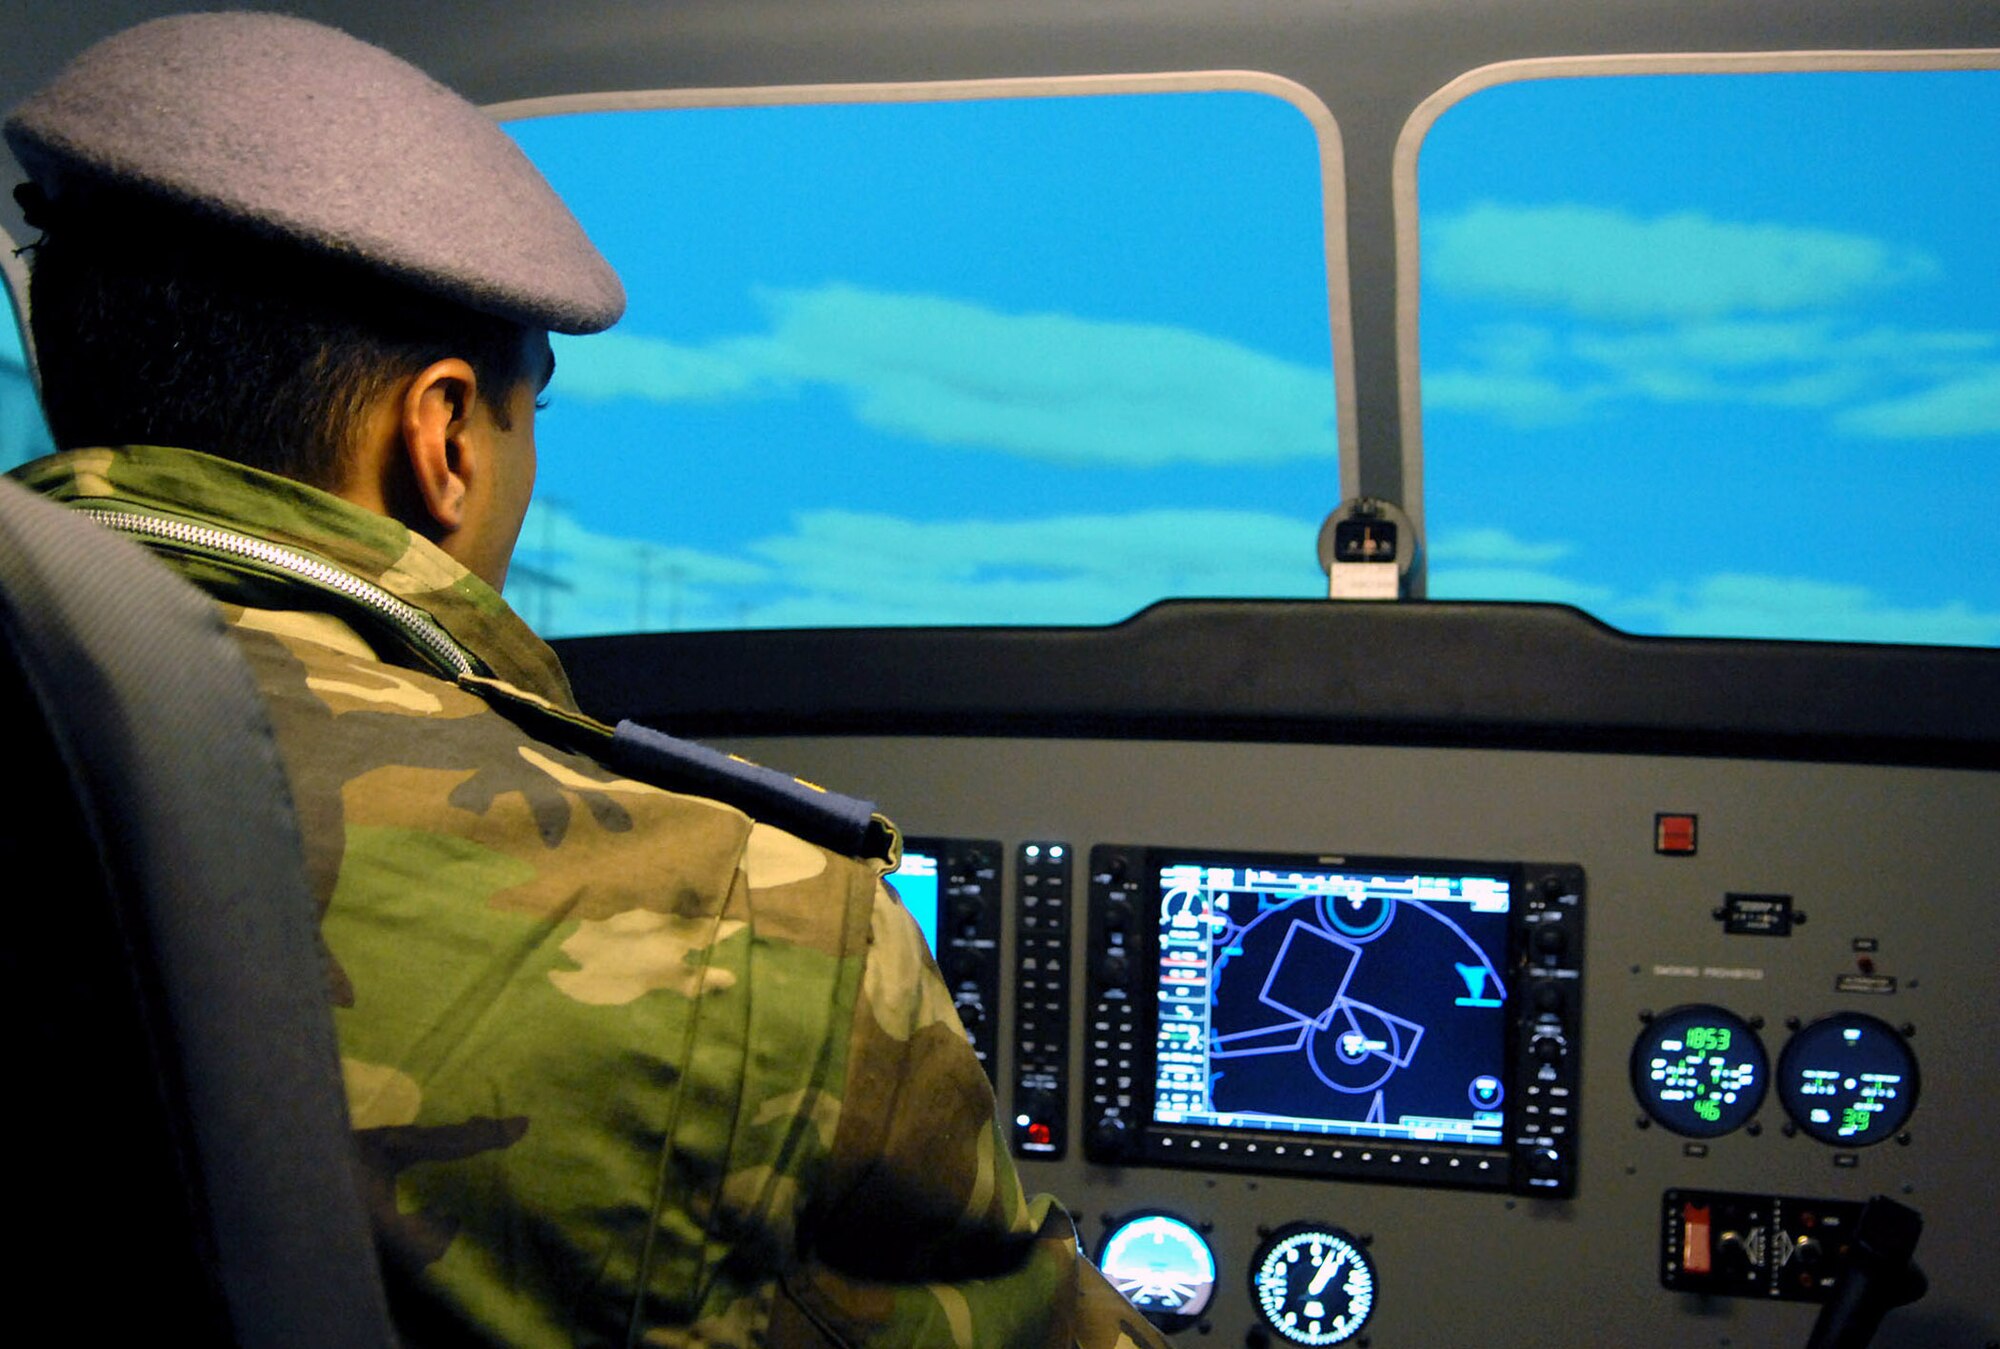 An Iraqi lieutenant takes controls of a Cessna simulator at the Iraqi Flying Training School here. Iraqi pilots have begun flying their own missions and have earned some initial successes. An all-Iraqi crew flying on a recent reconnaissance mission spotted several terrorists manufacturing improvised explosive devices. The crewmembers alerted Iraqi police who arrived on-scene soon after to impede the terrorist?s efforts. (U.S. Air Force photo/Senior Airman SerMae Lampkin)